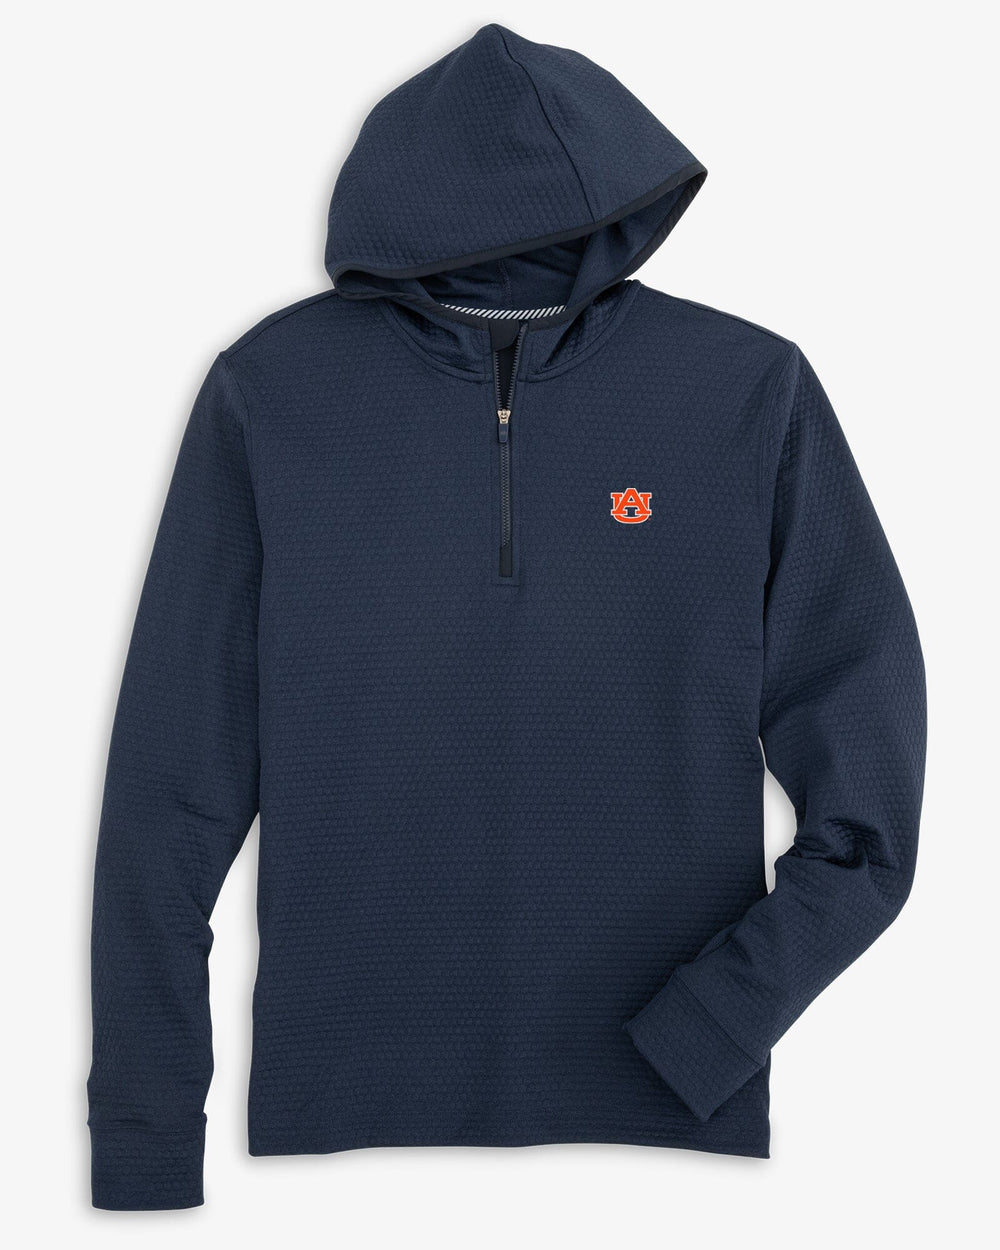 The front view of the Auburn Tigers Scuttle Heather Performance Quarter Zip Hoodie by Southern Tide - Heather True Navy